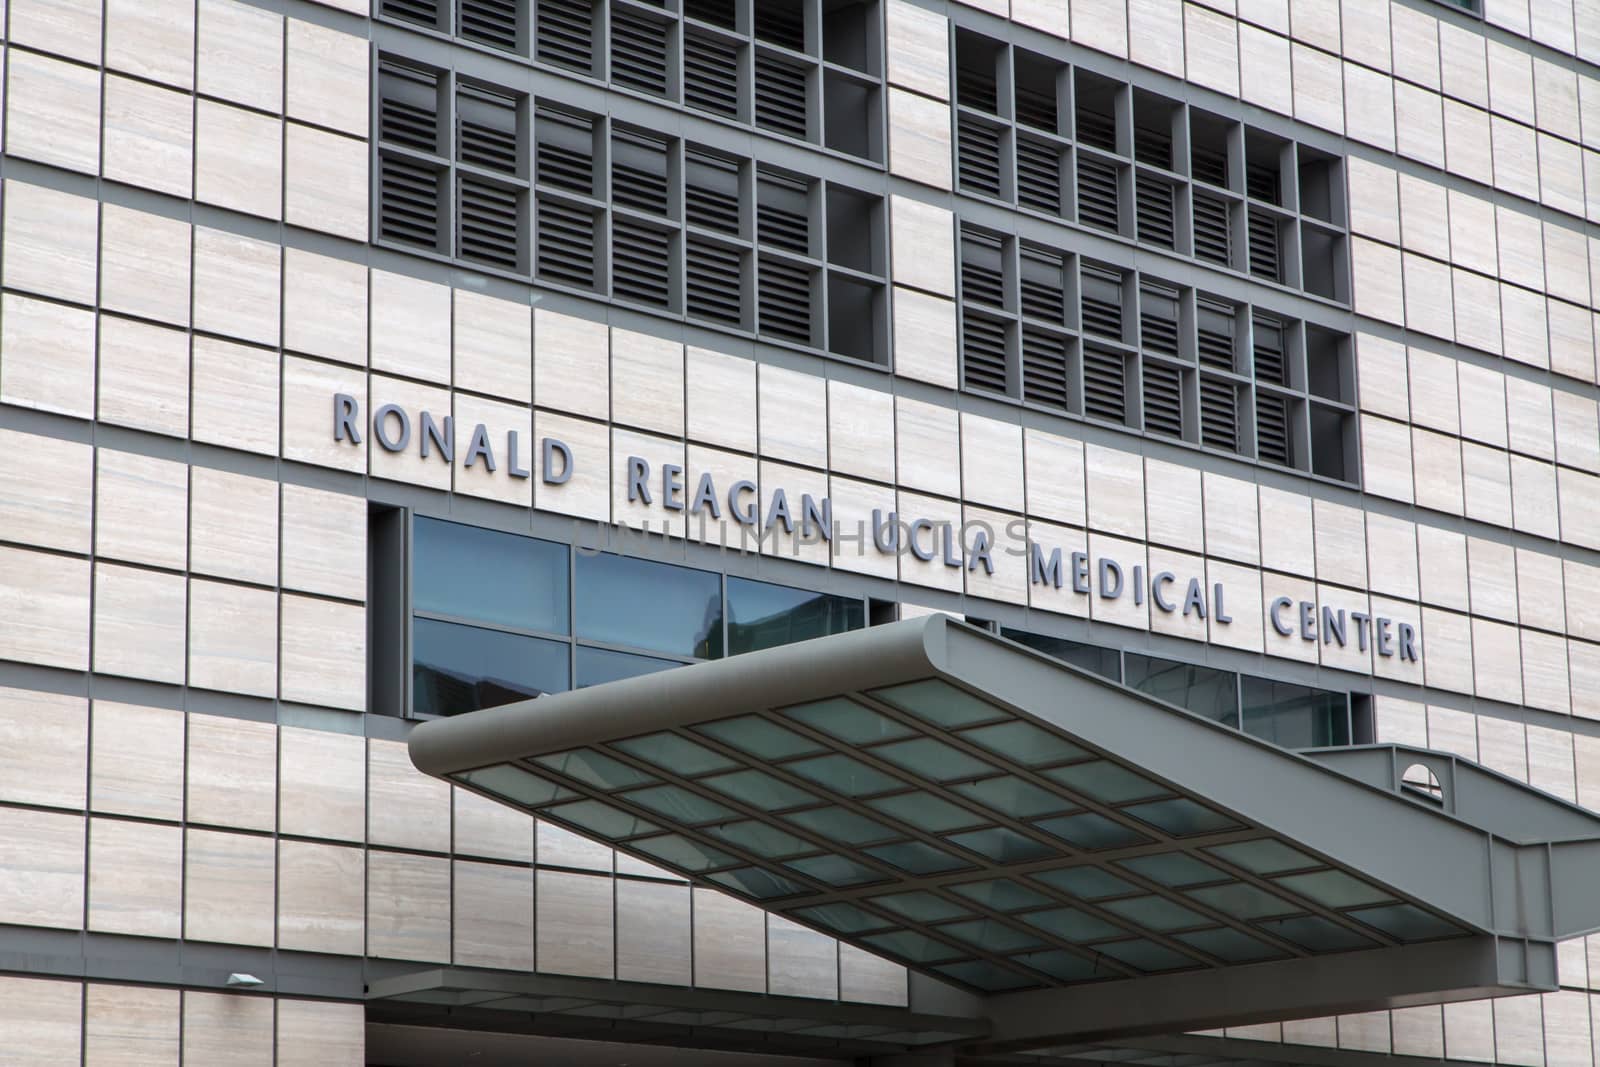 LOS ANGELES, CA/USA - MAY 25, 2015: Ronald Reagan UCLA Medical Center. The UCLA Medical Center is a hospital in Los Angeles, California, United States.